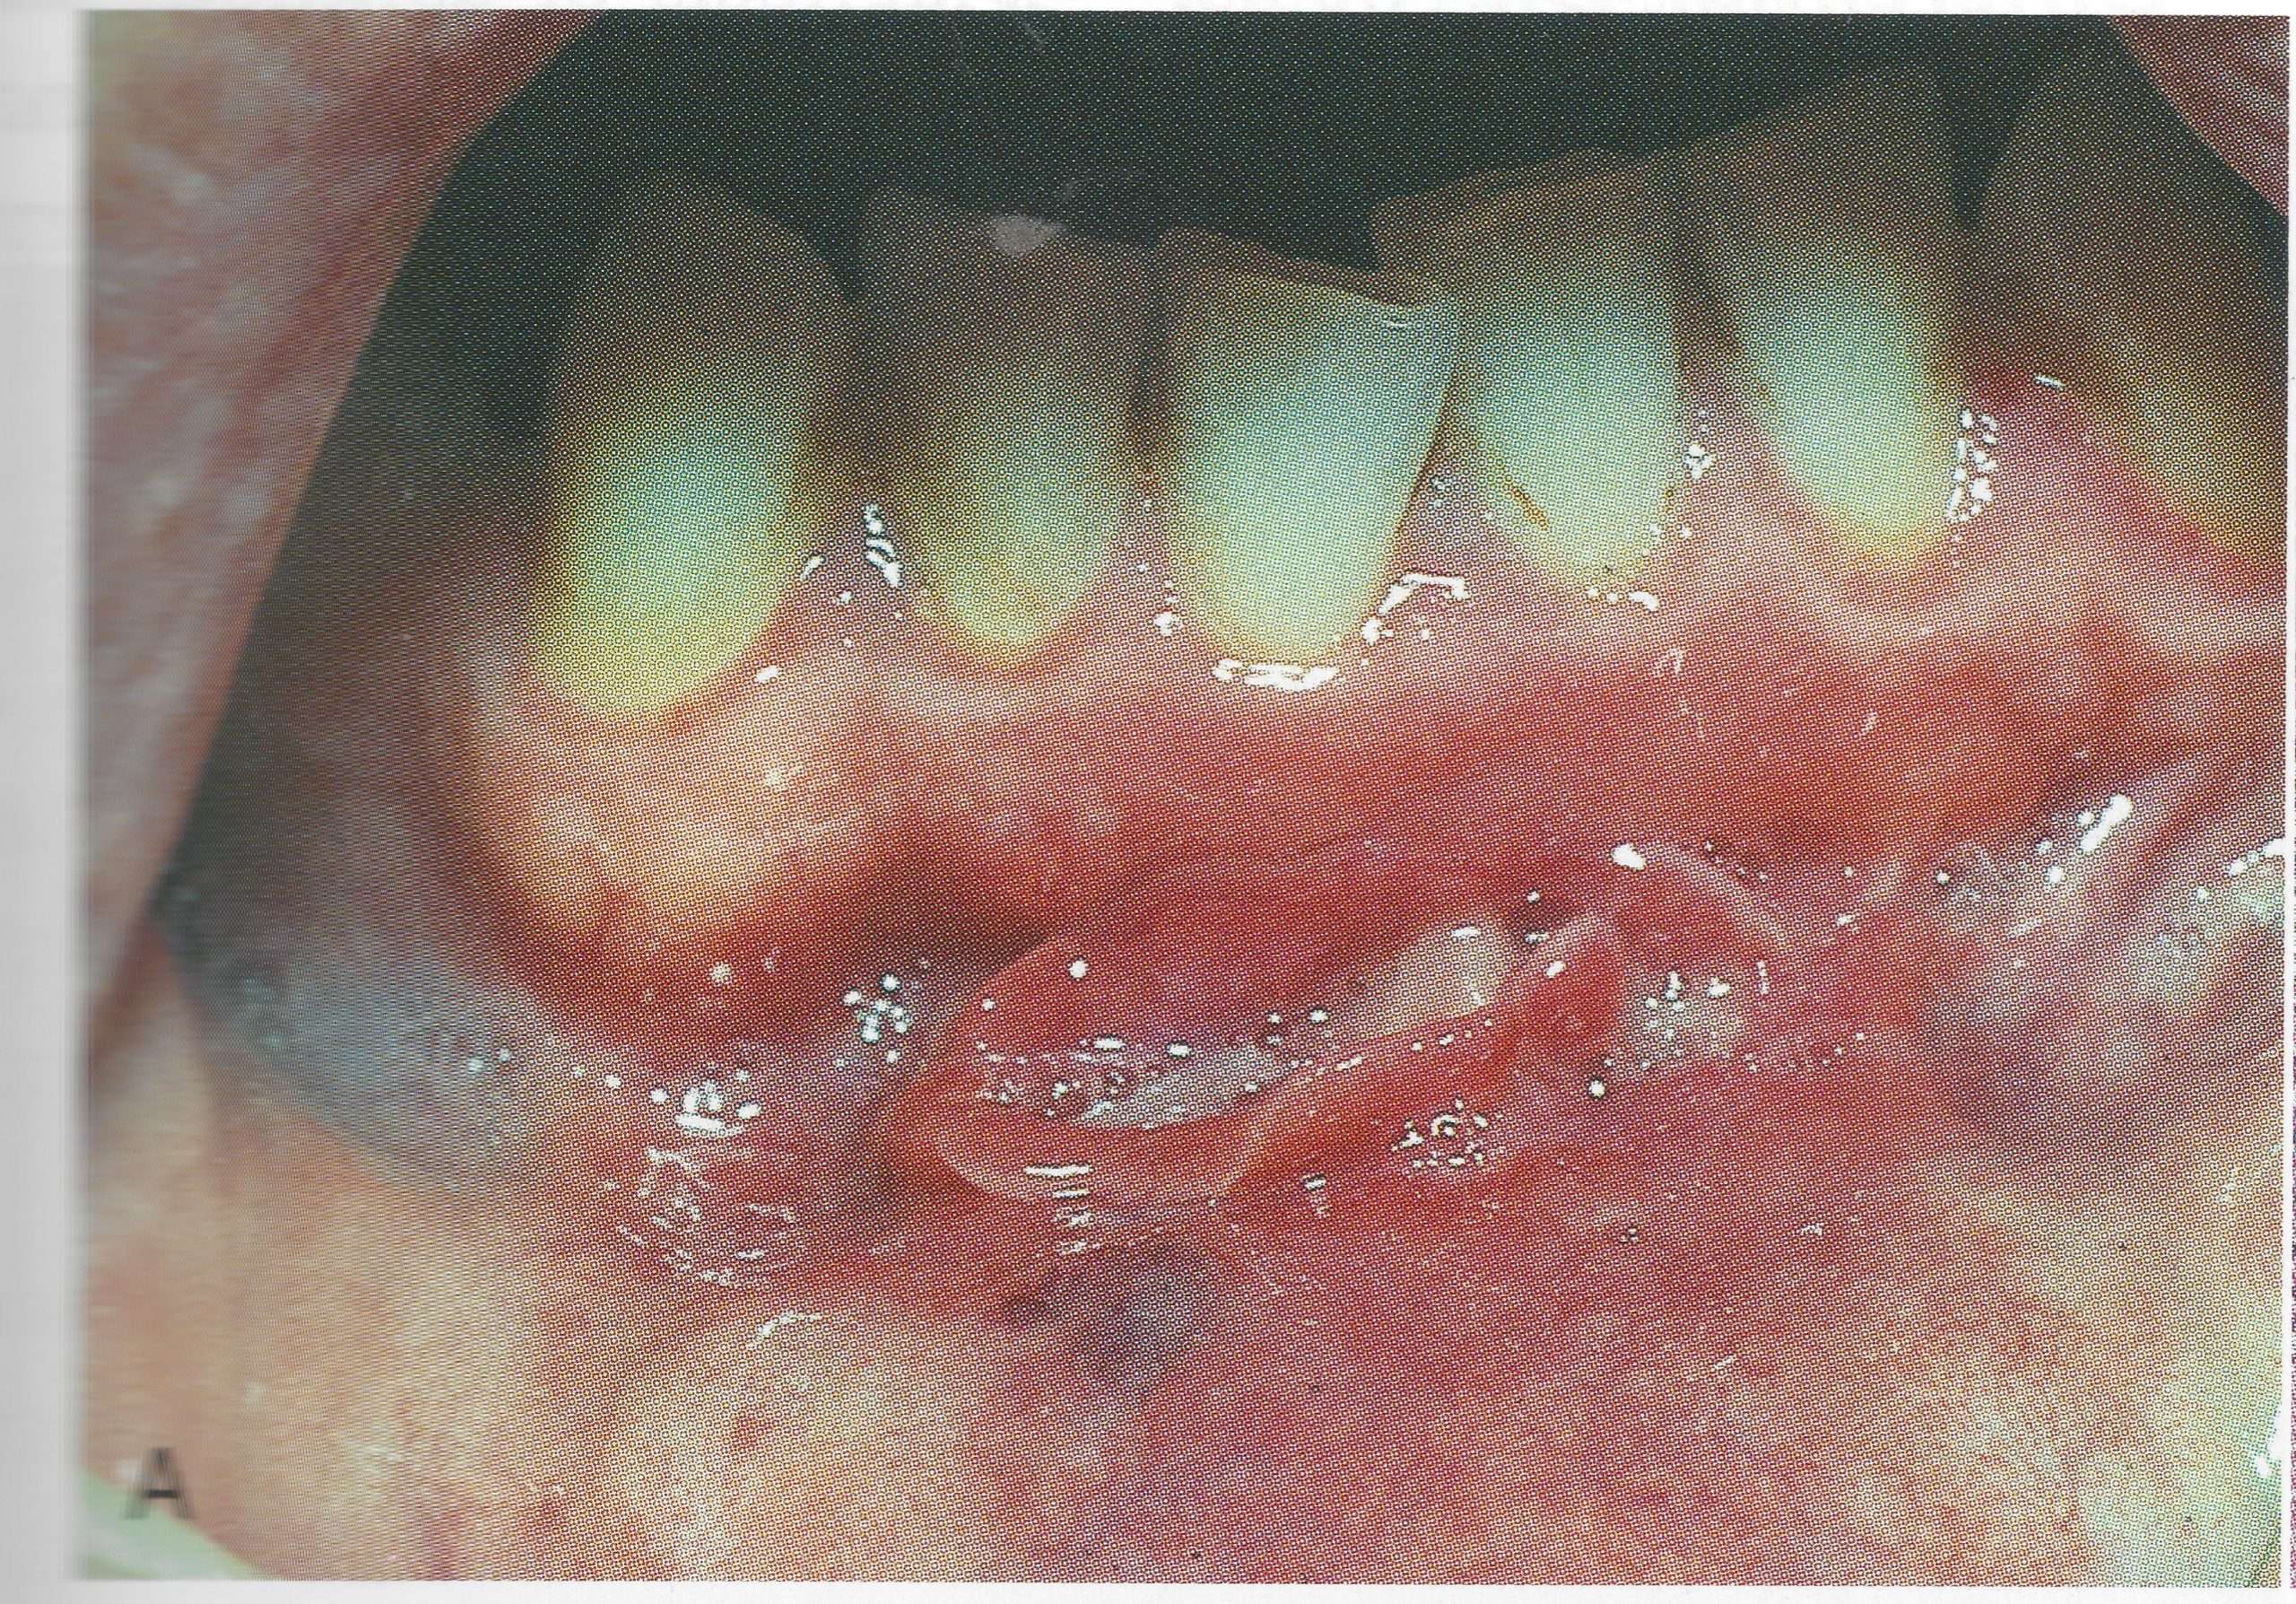 Aphthous Ulcers (Canker Sores)